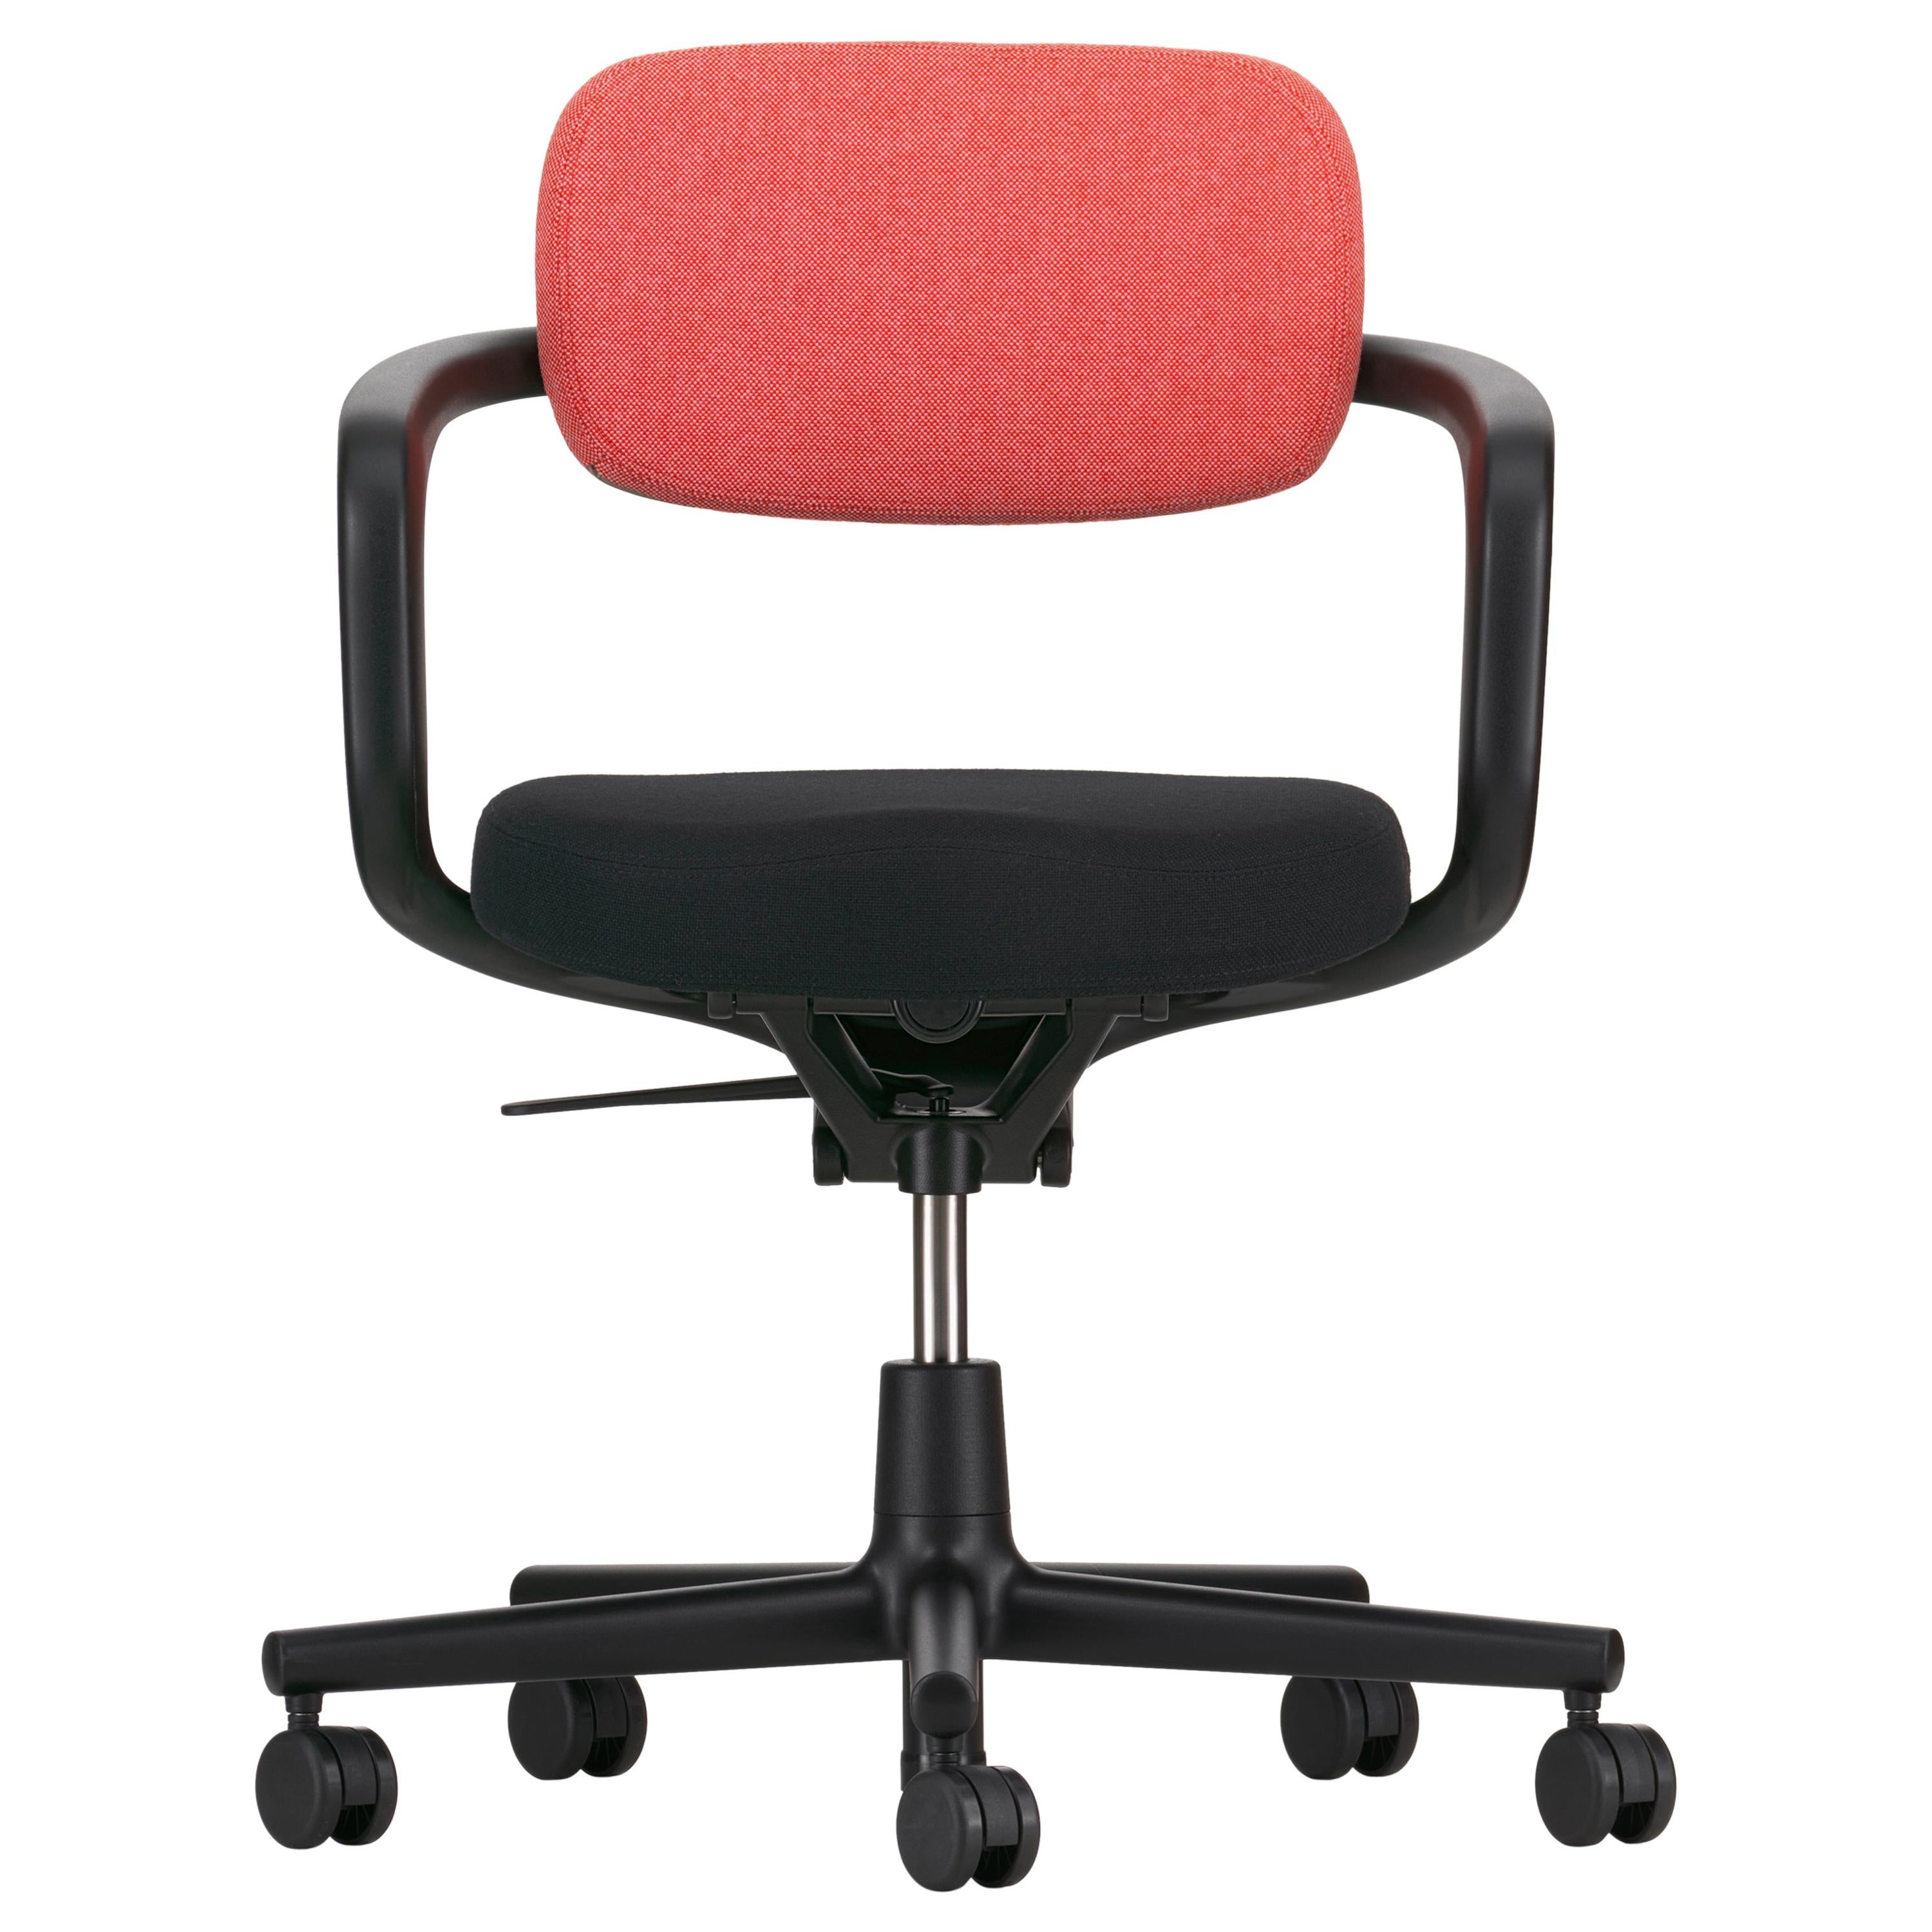 Vitra Allstar Chair in Poppy Red & Ivory and Nero Hopsak by Konstantin Grcic For Sale